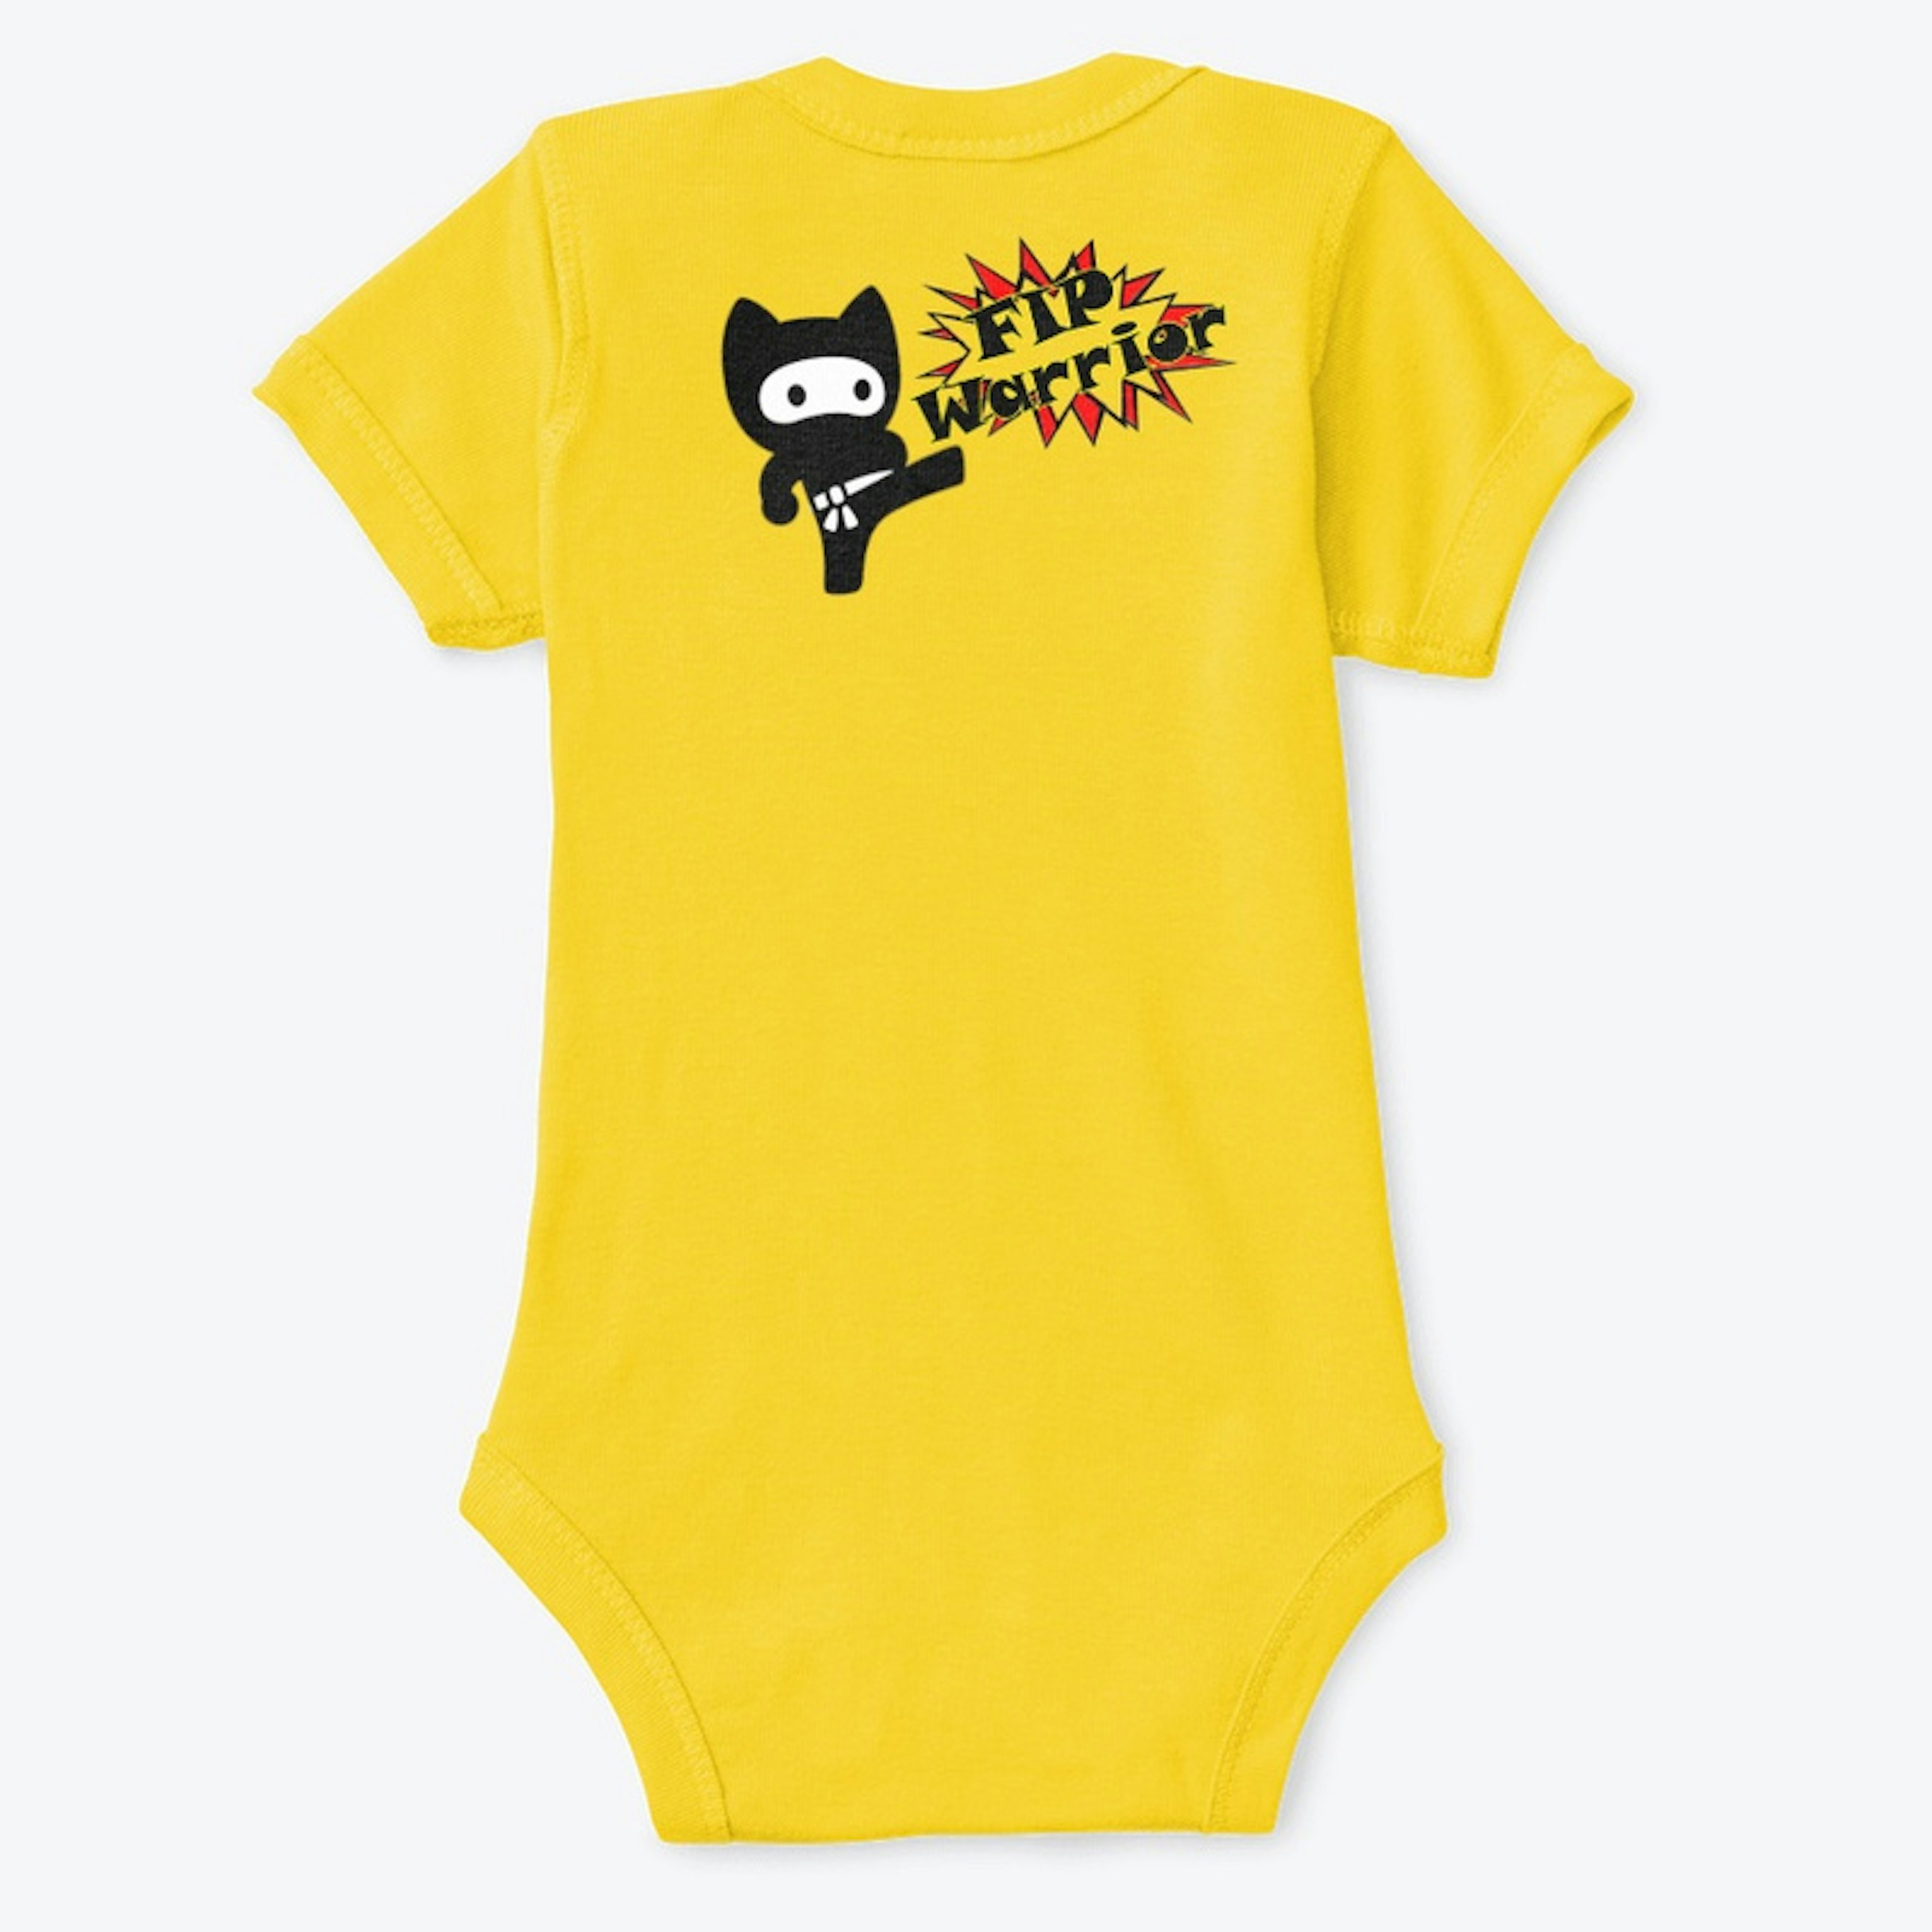 Infant apparel is also suitable for cats